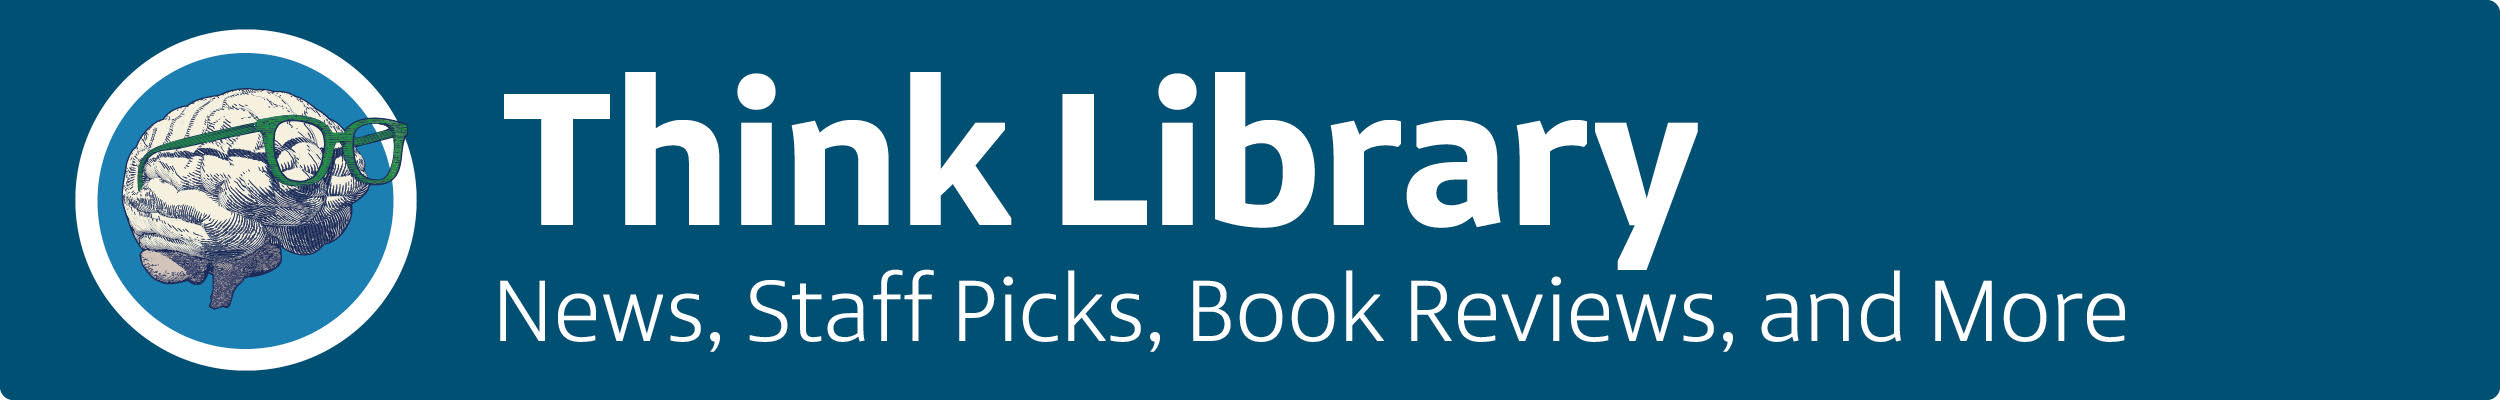 Think Library - News, Staff Picks, Book Reviews, More!